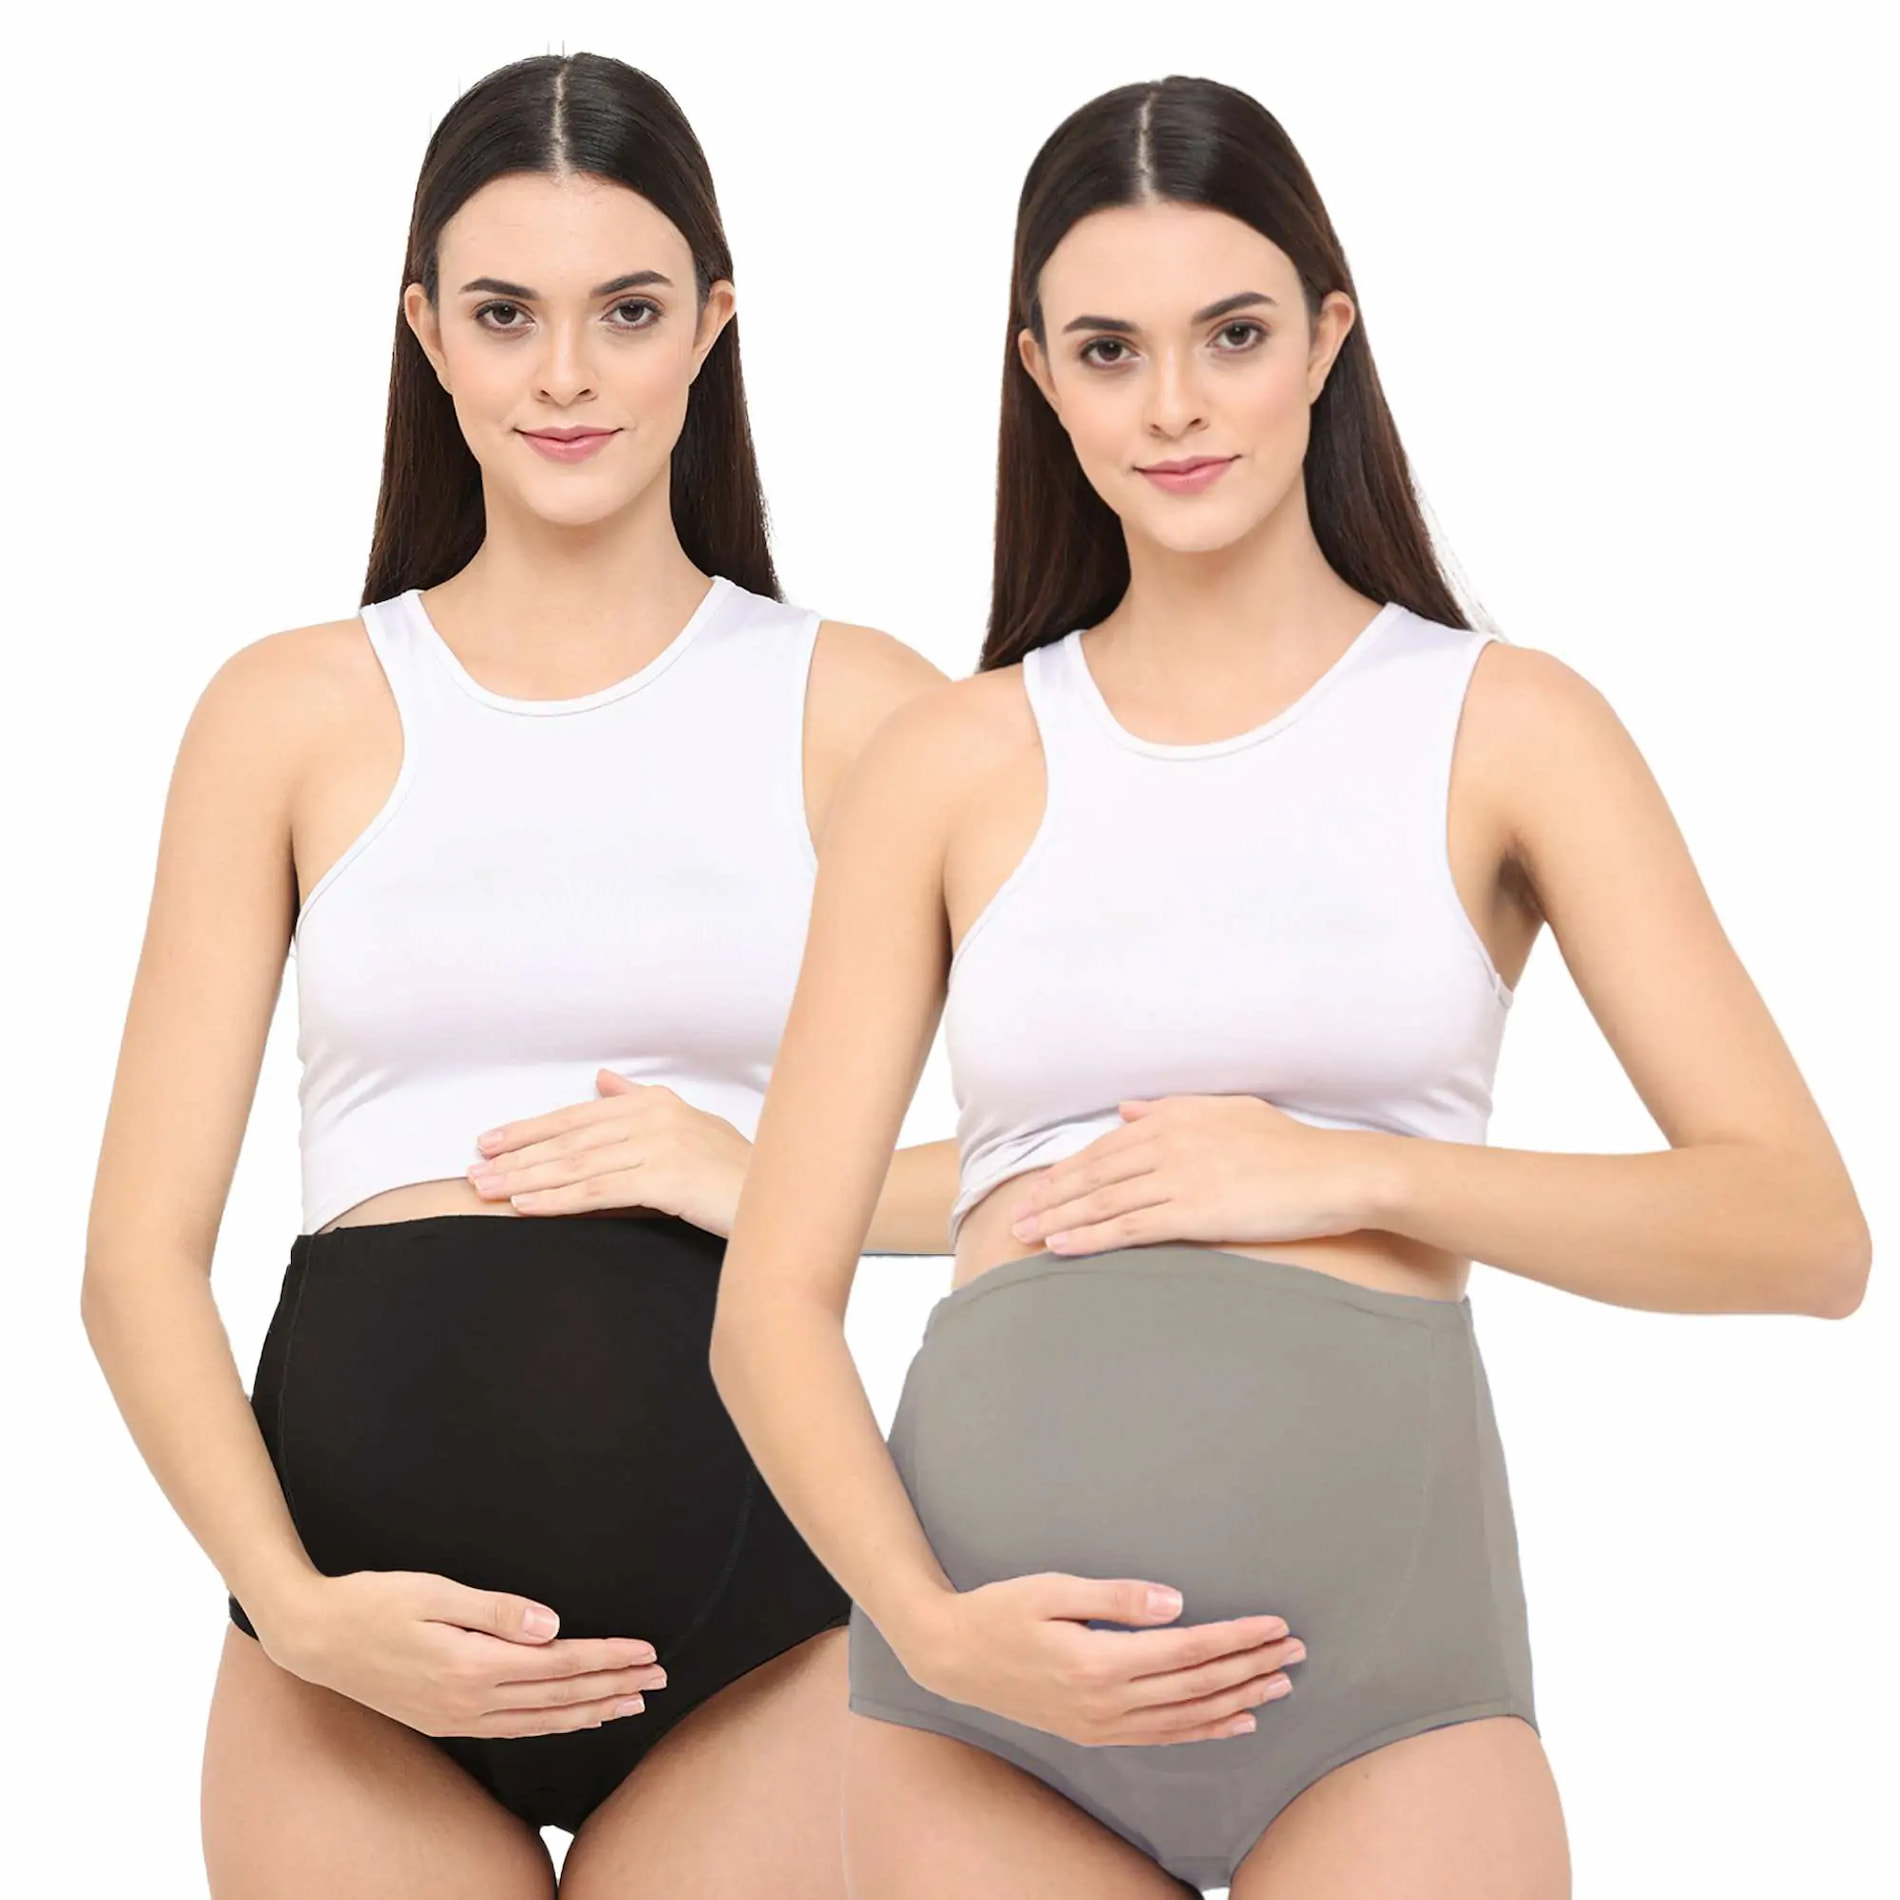 Mylo High Waist Maternity/Postpartum Panty - Anti-Microbial with Comfy Adjustable Waistband – Cloud Grey & Black Beauty-M-Pack of 2